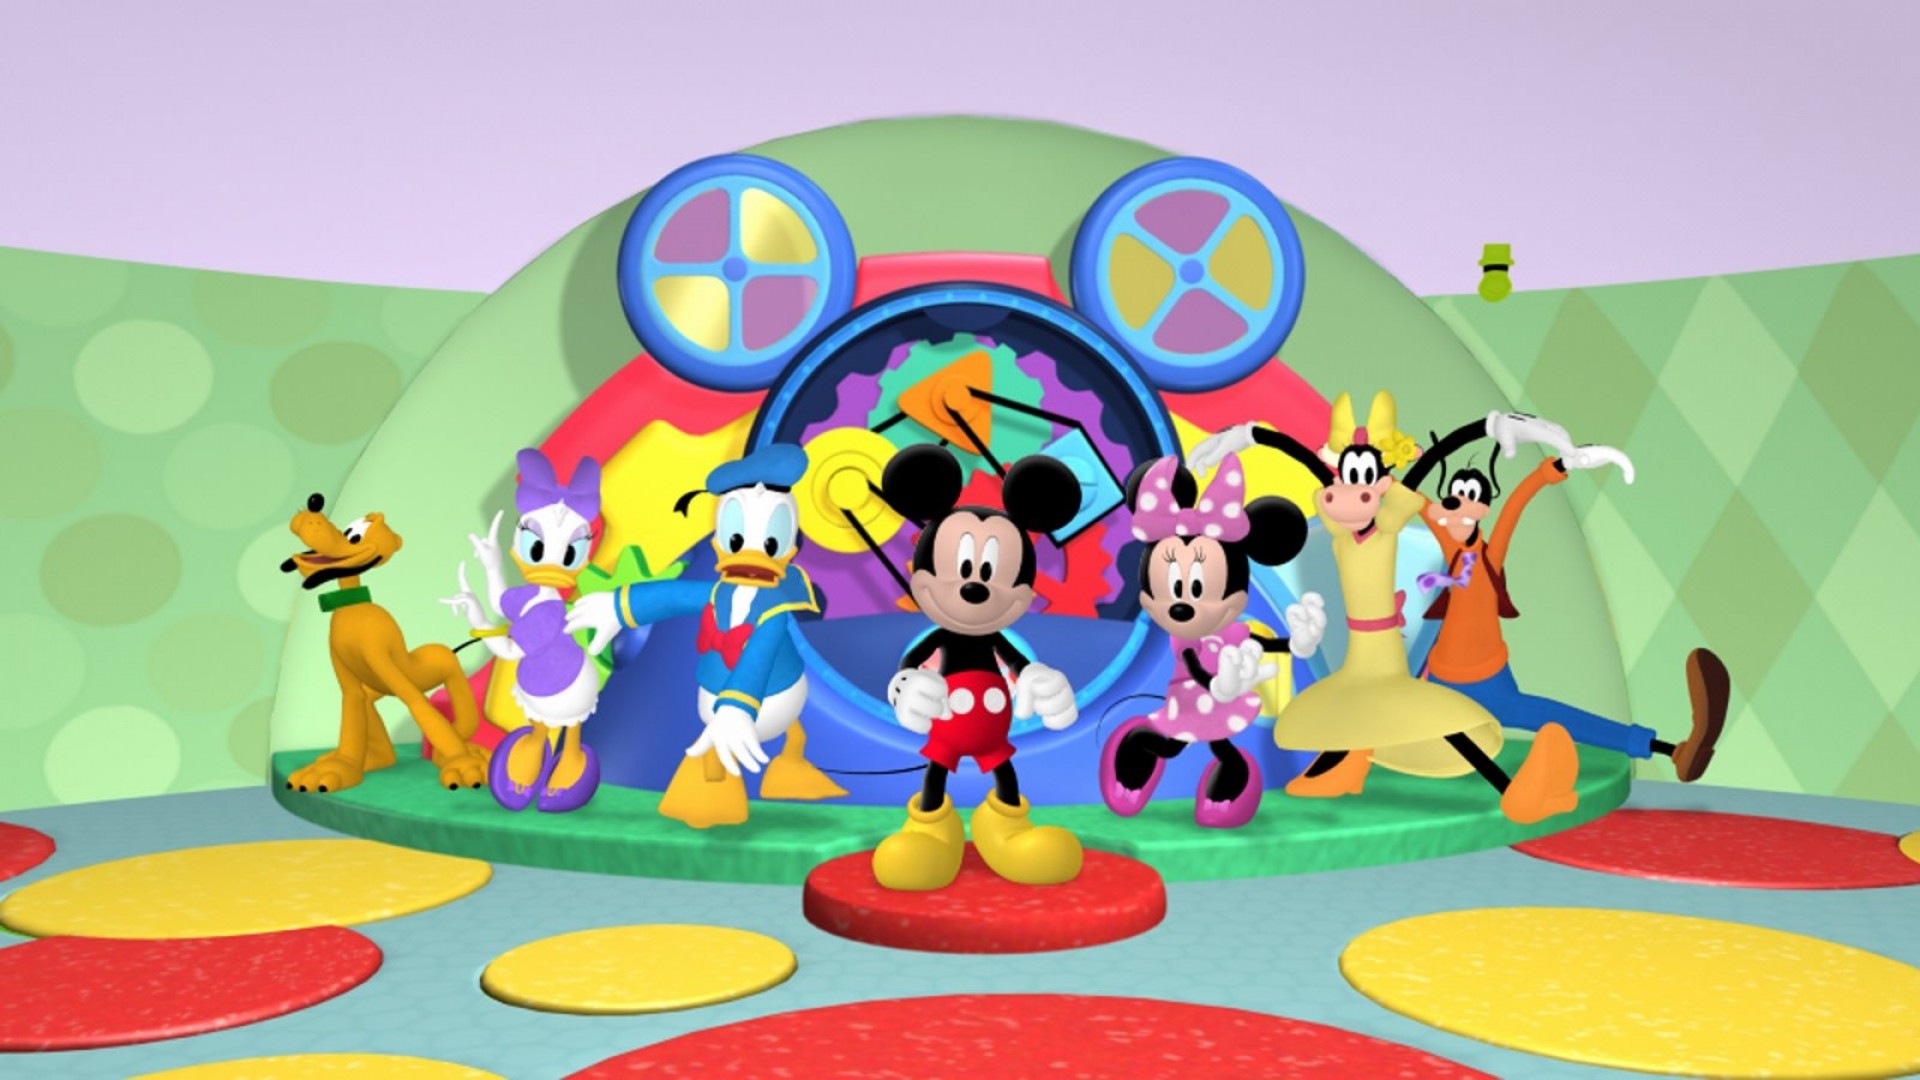 Mickey Mouse Clubhouse Wallpapers 627 Hd Wallpapers - Mickey Mouse Clubhouse Wallpaper Hd - HD Wallpaper 